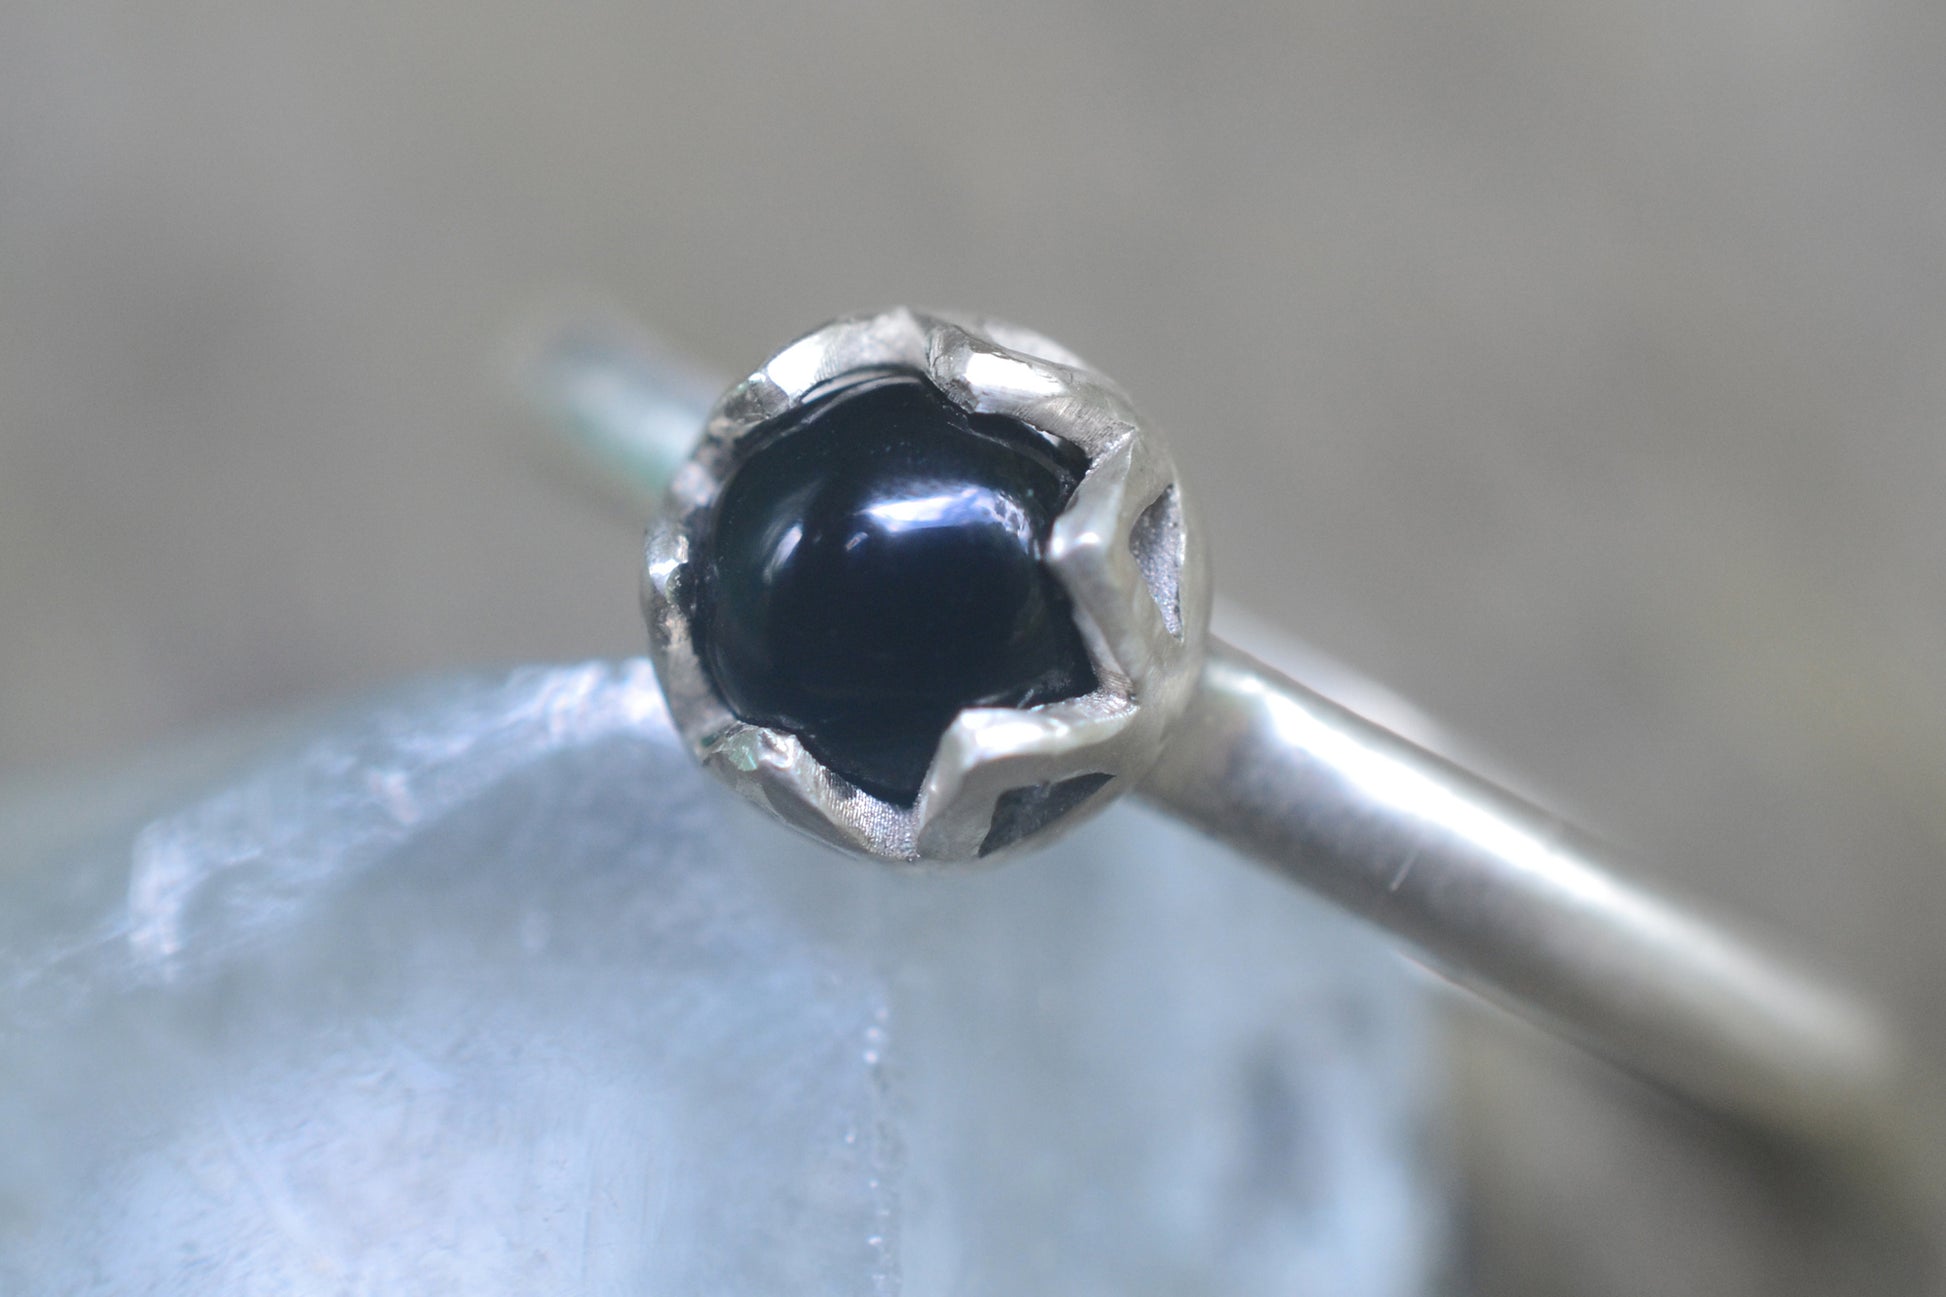 5mm Black Onyx Cabochon Ring in Silver